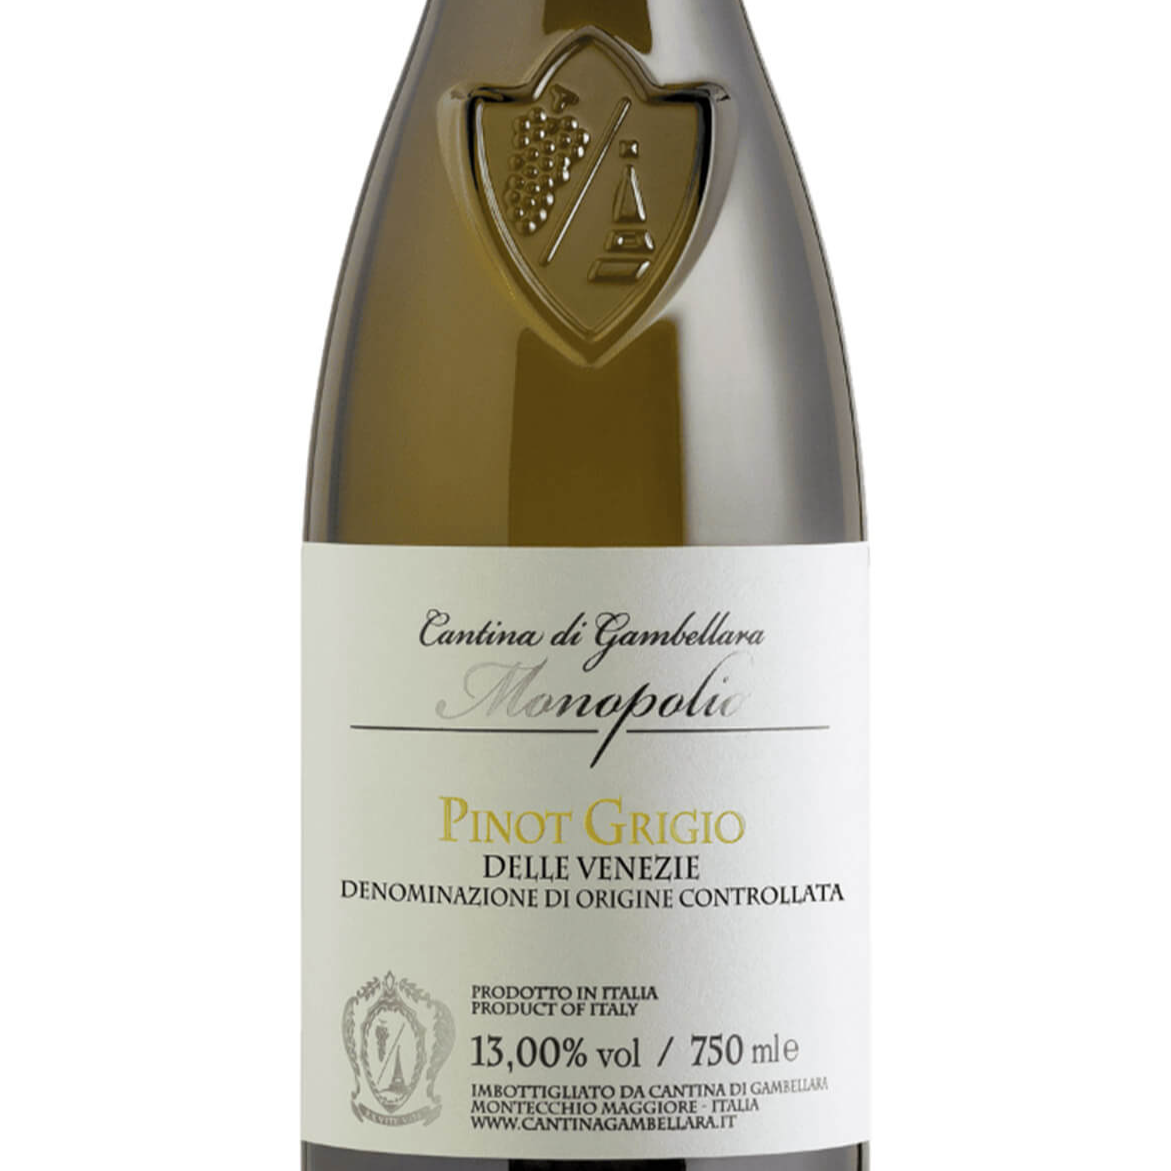 Find out more, explore the range and purchase Cantina di Gambellara Monopolio Pinot Grigio 2023 (Italy) available online at Wine Sellers Direct - Australia's independent liquor specialists.